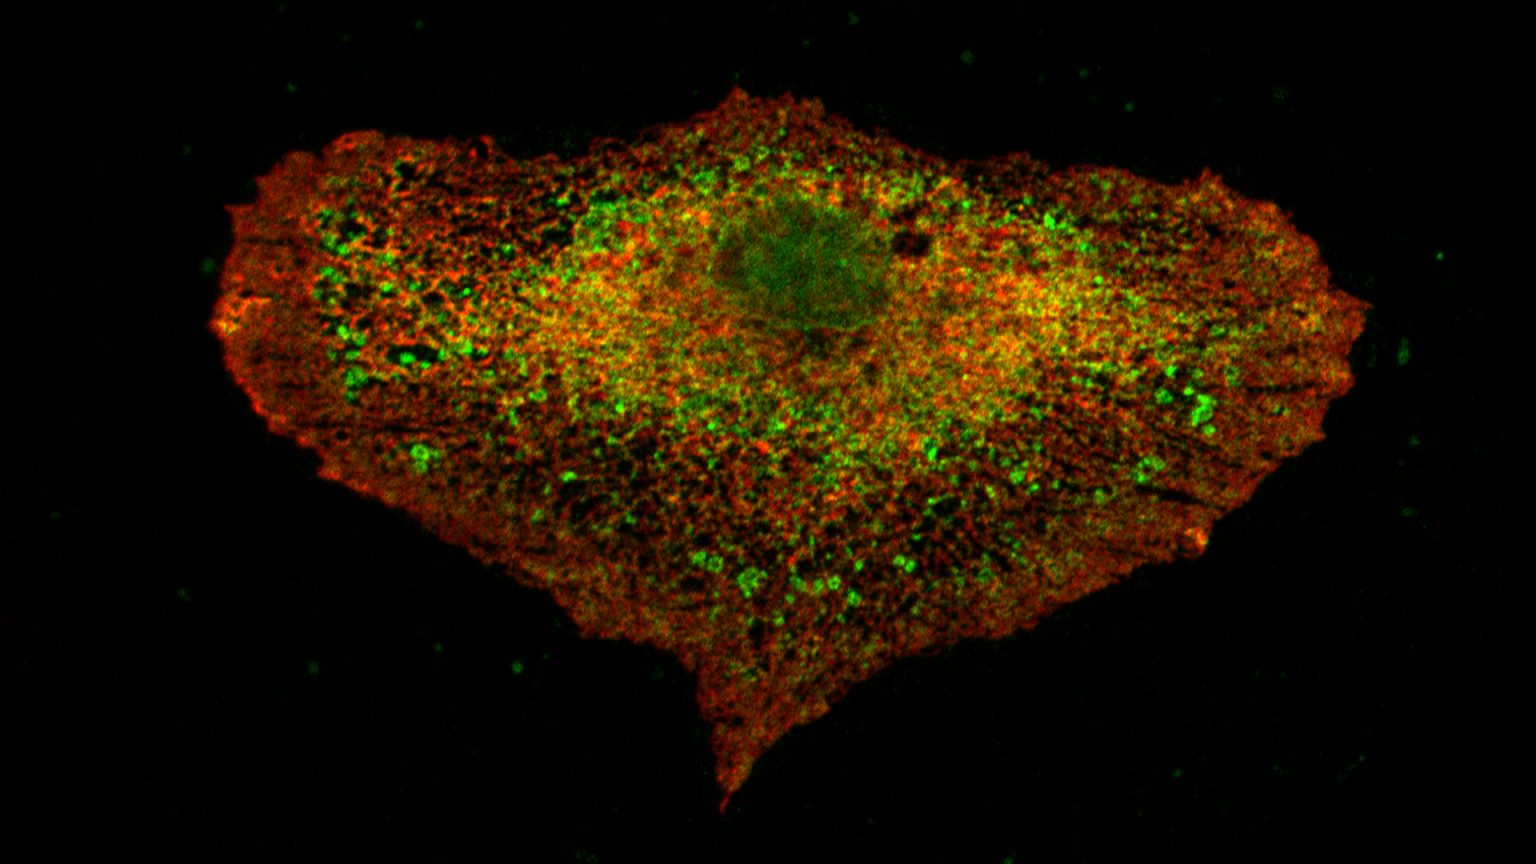 RPE1 Cells Stained With Antibodies Recognising Two Membrane Proteins, ZFYVE27 In Red And VAP A In Green | © EPFL